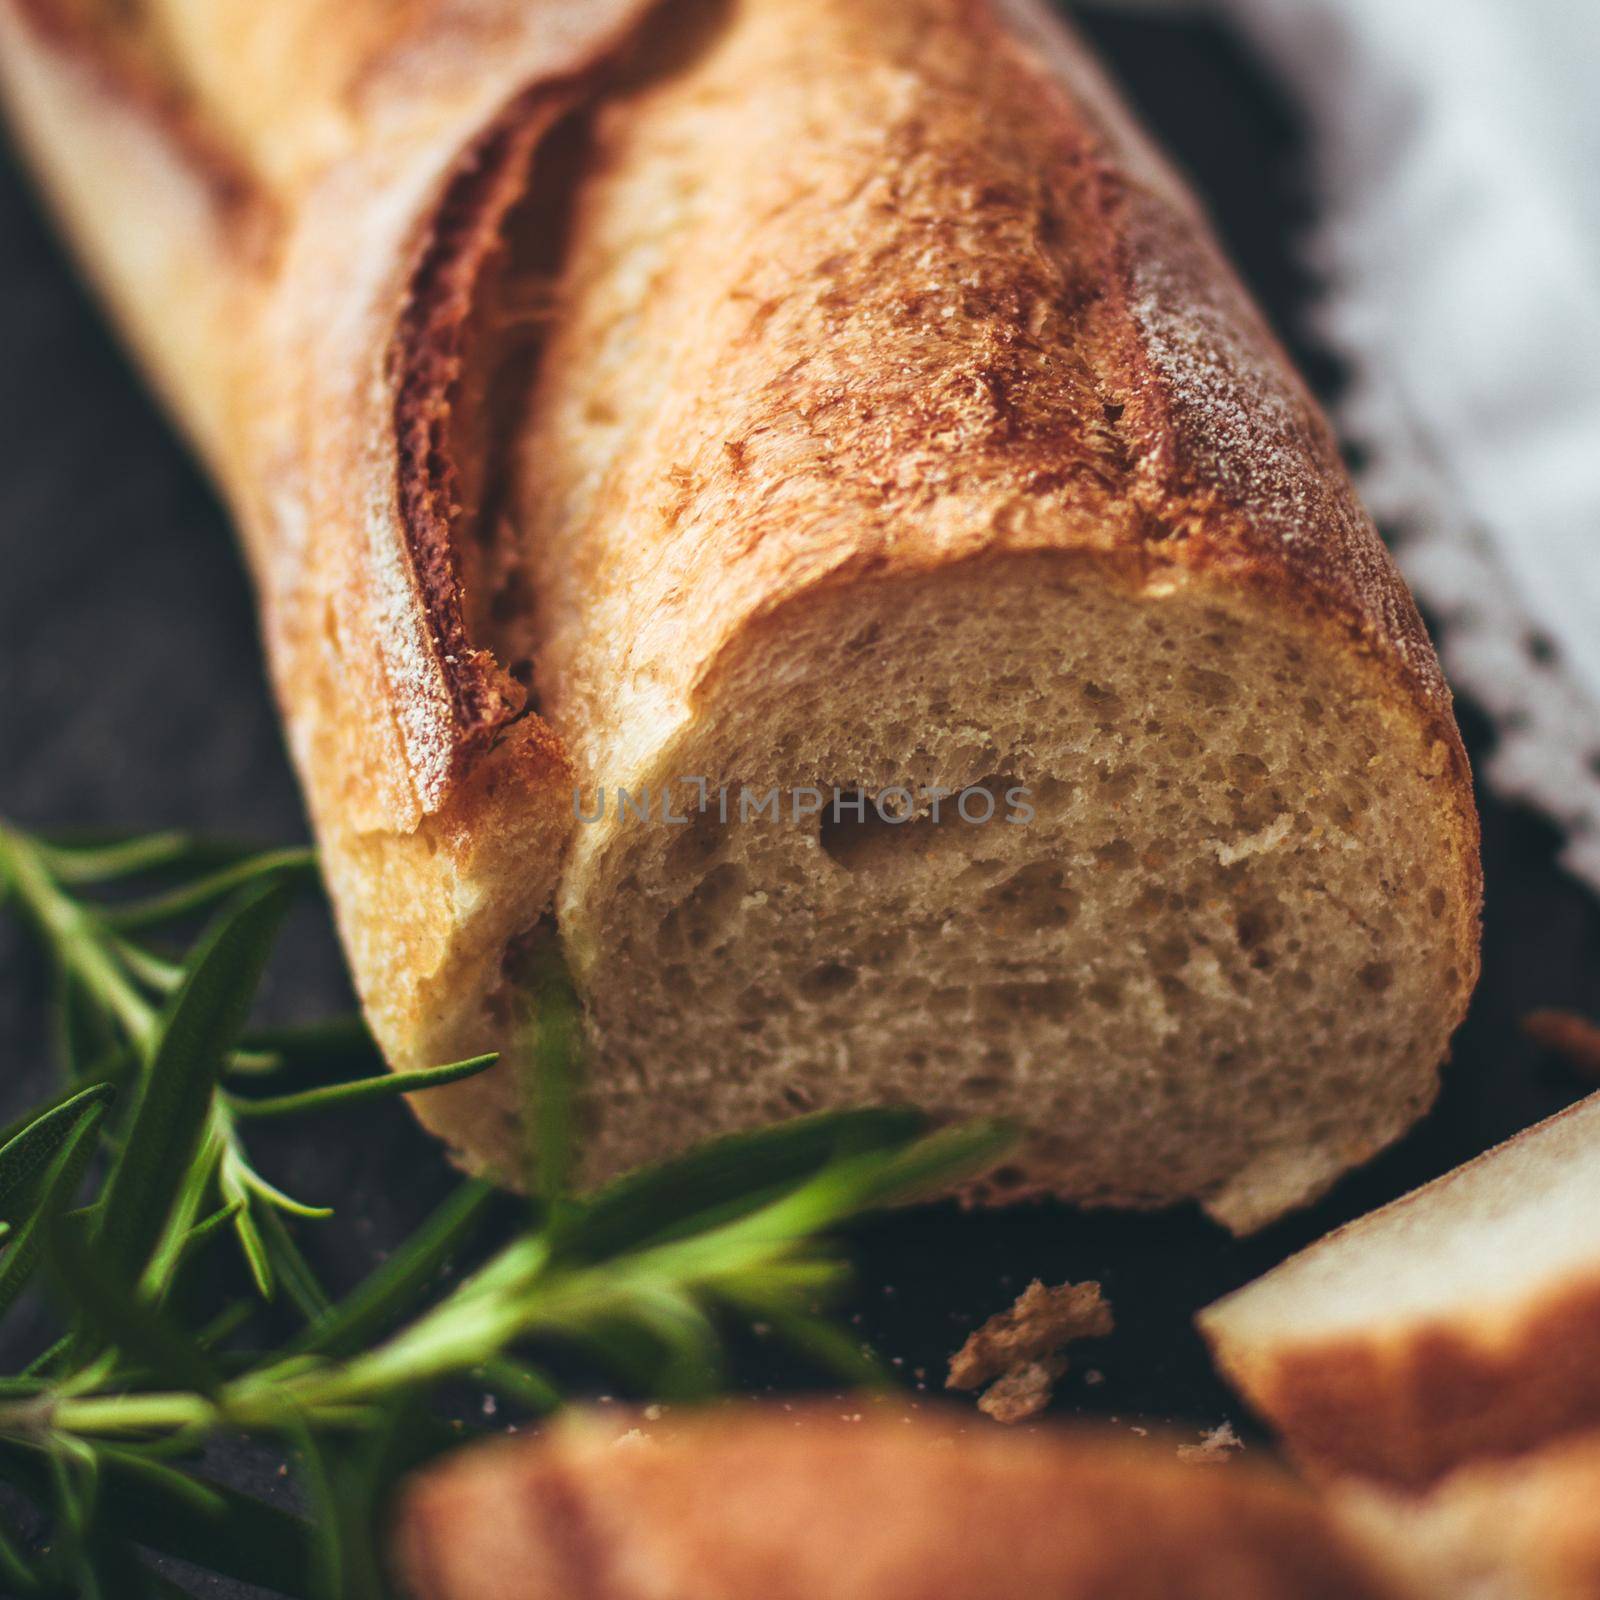 homemade food and pastry styled concept - rustic whole wheat bread recipe, elegant visuals